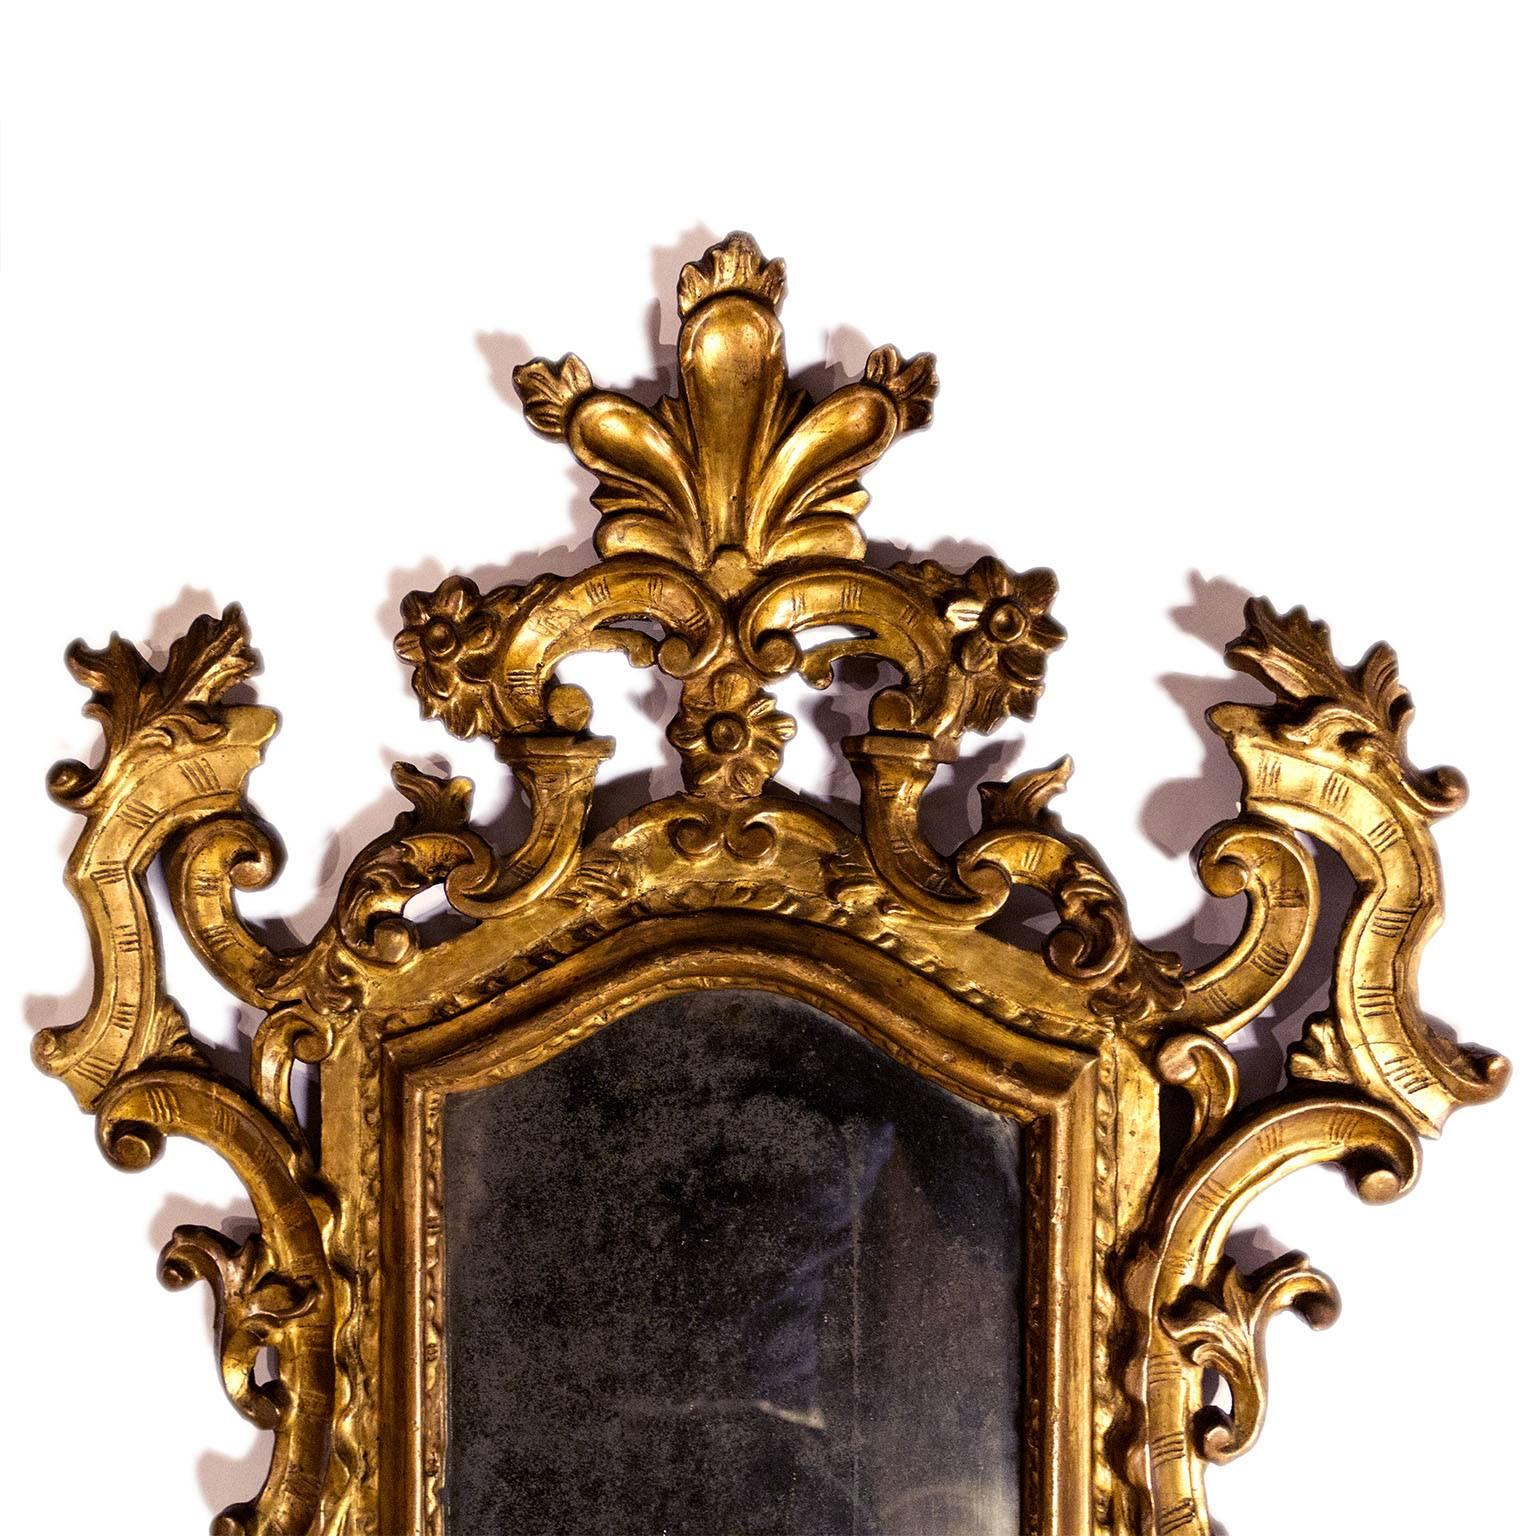 Fine Giltwood 18th Century Carved Mirror In Excellent Condition For Sale In Monza, IT